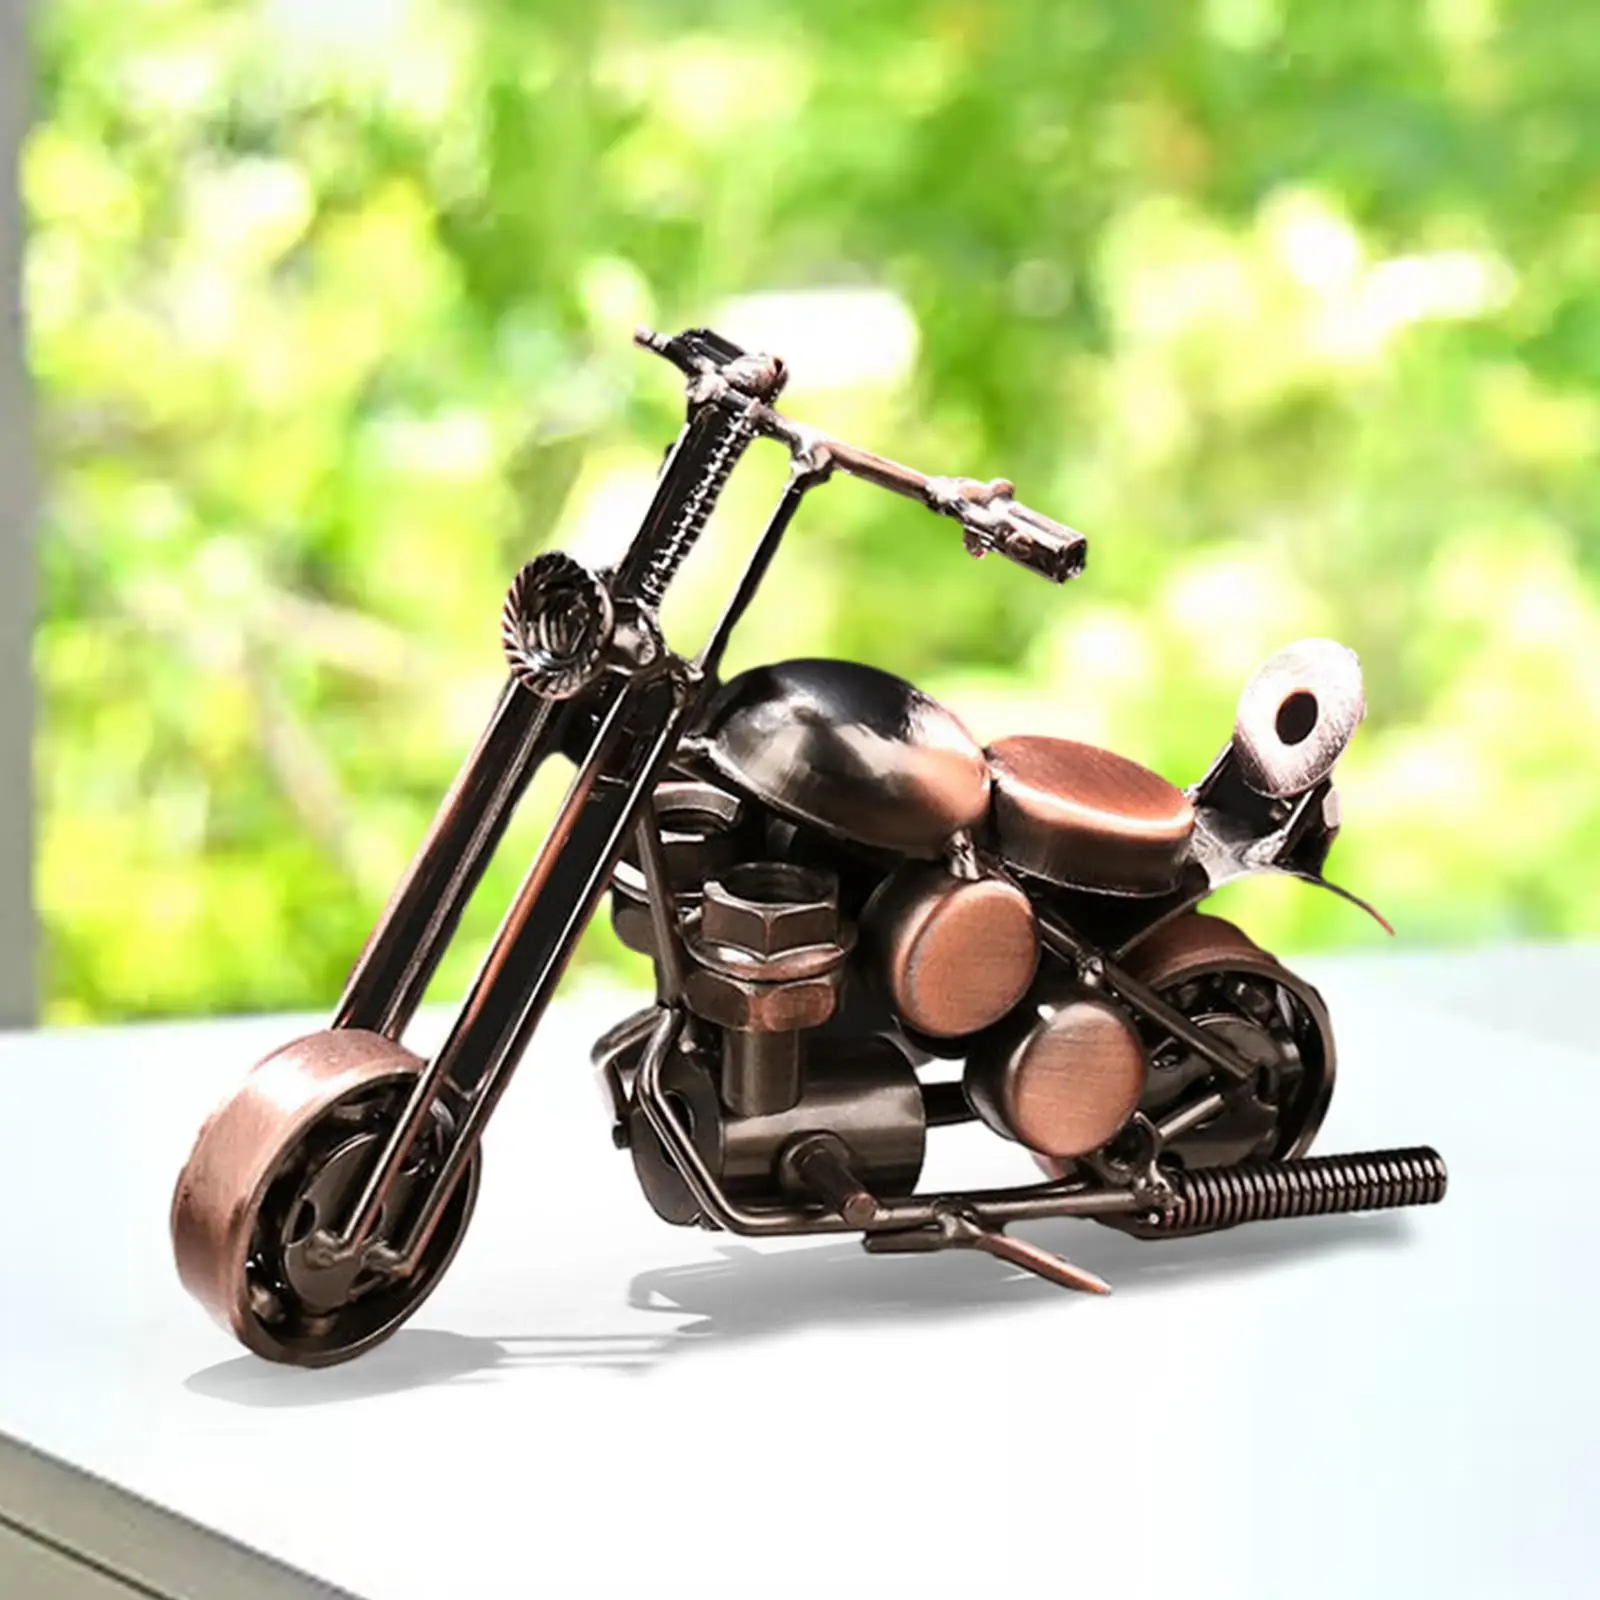 Motorcycle Model Motorcycle Sculpture Crafts Photo Props Iron Artwork Collectible for Desk Home Adults Motorcycle Lovers